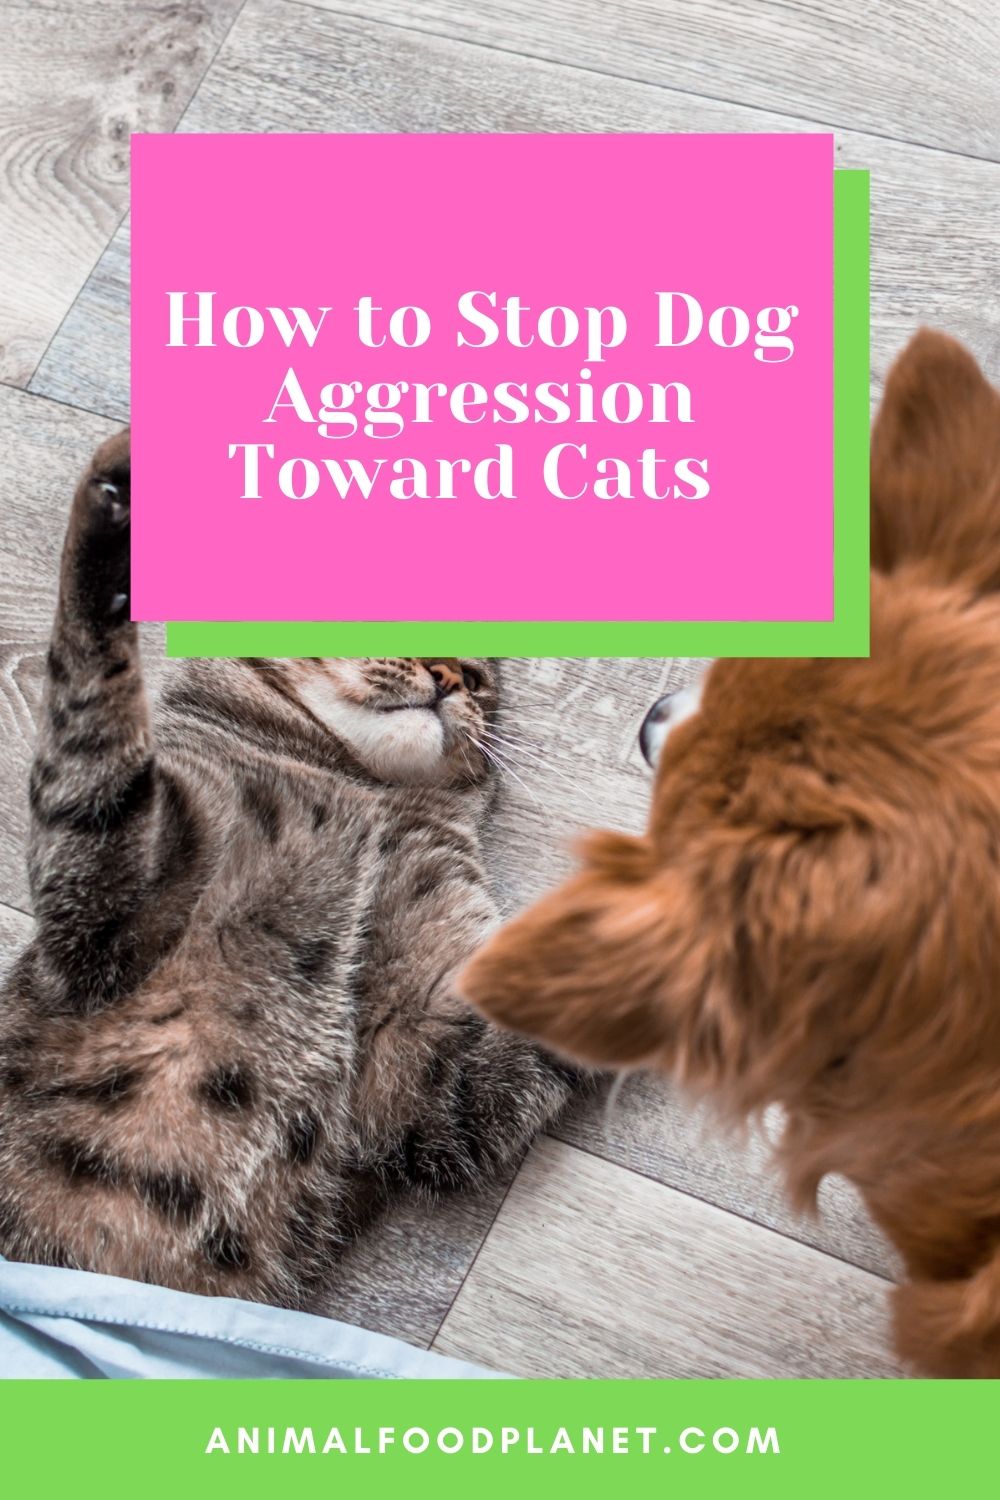 How to Stop Dog Aggression Toward Cats